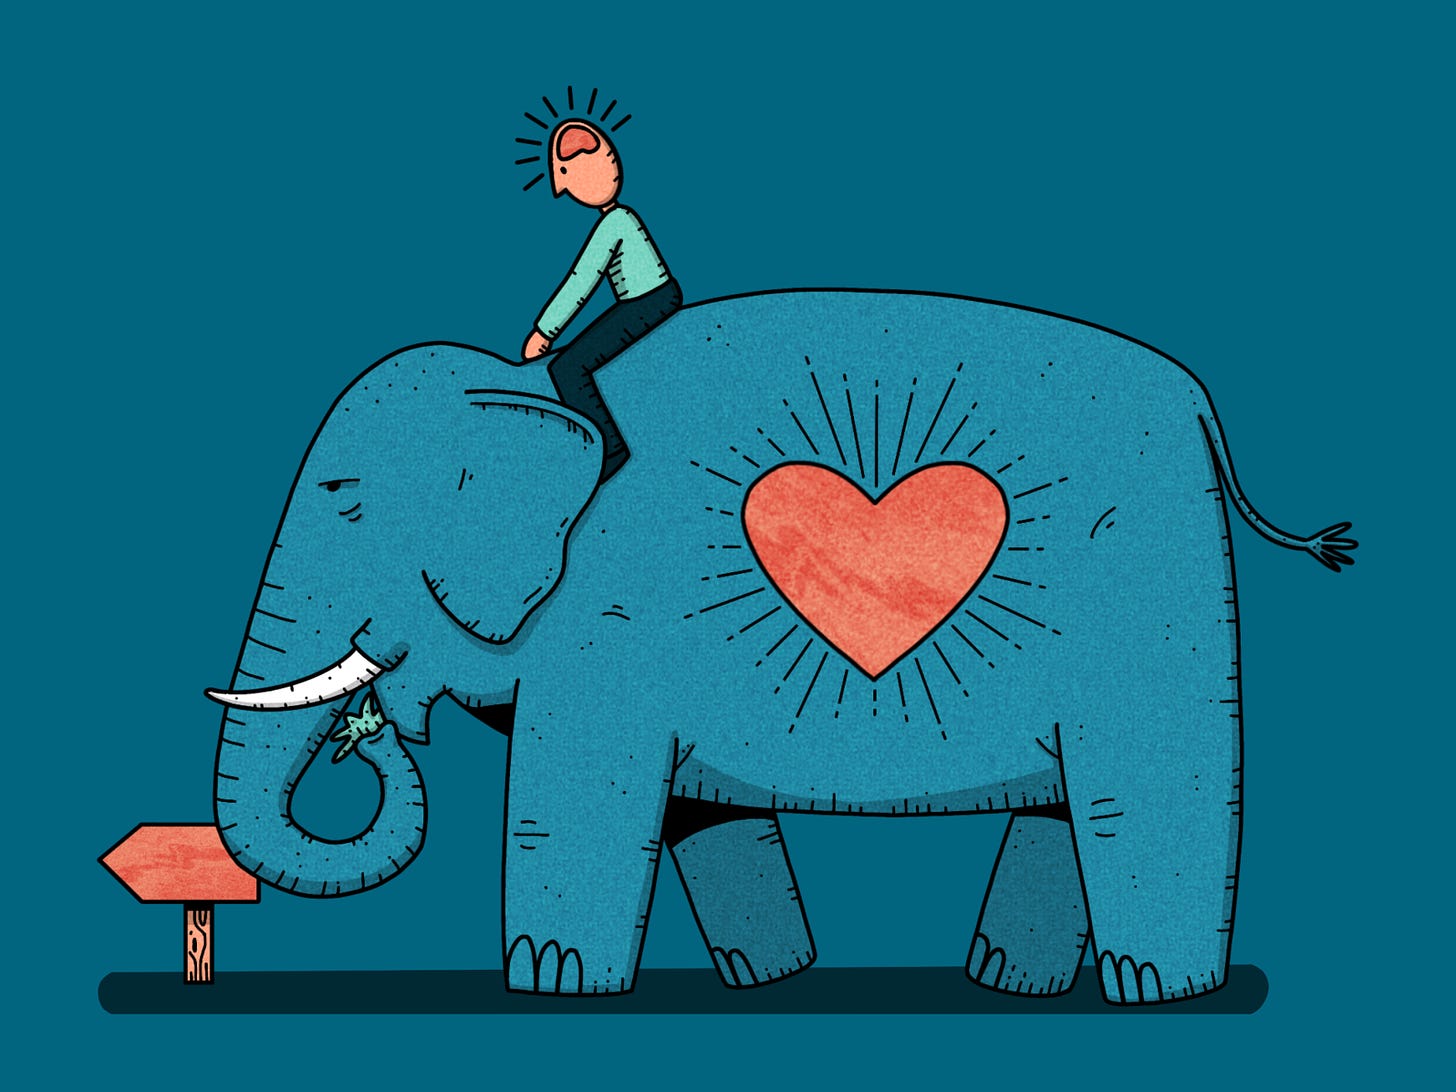 Rider and Elephant by Kinsley Johnson on Dribbble